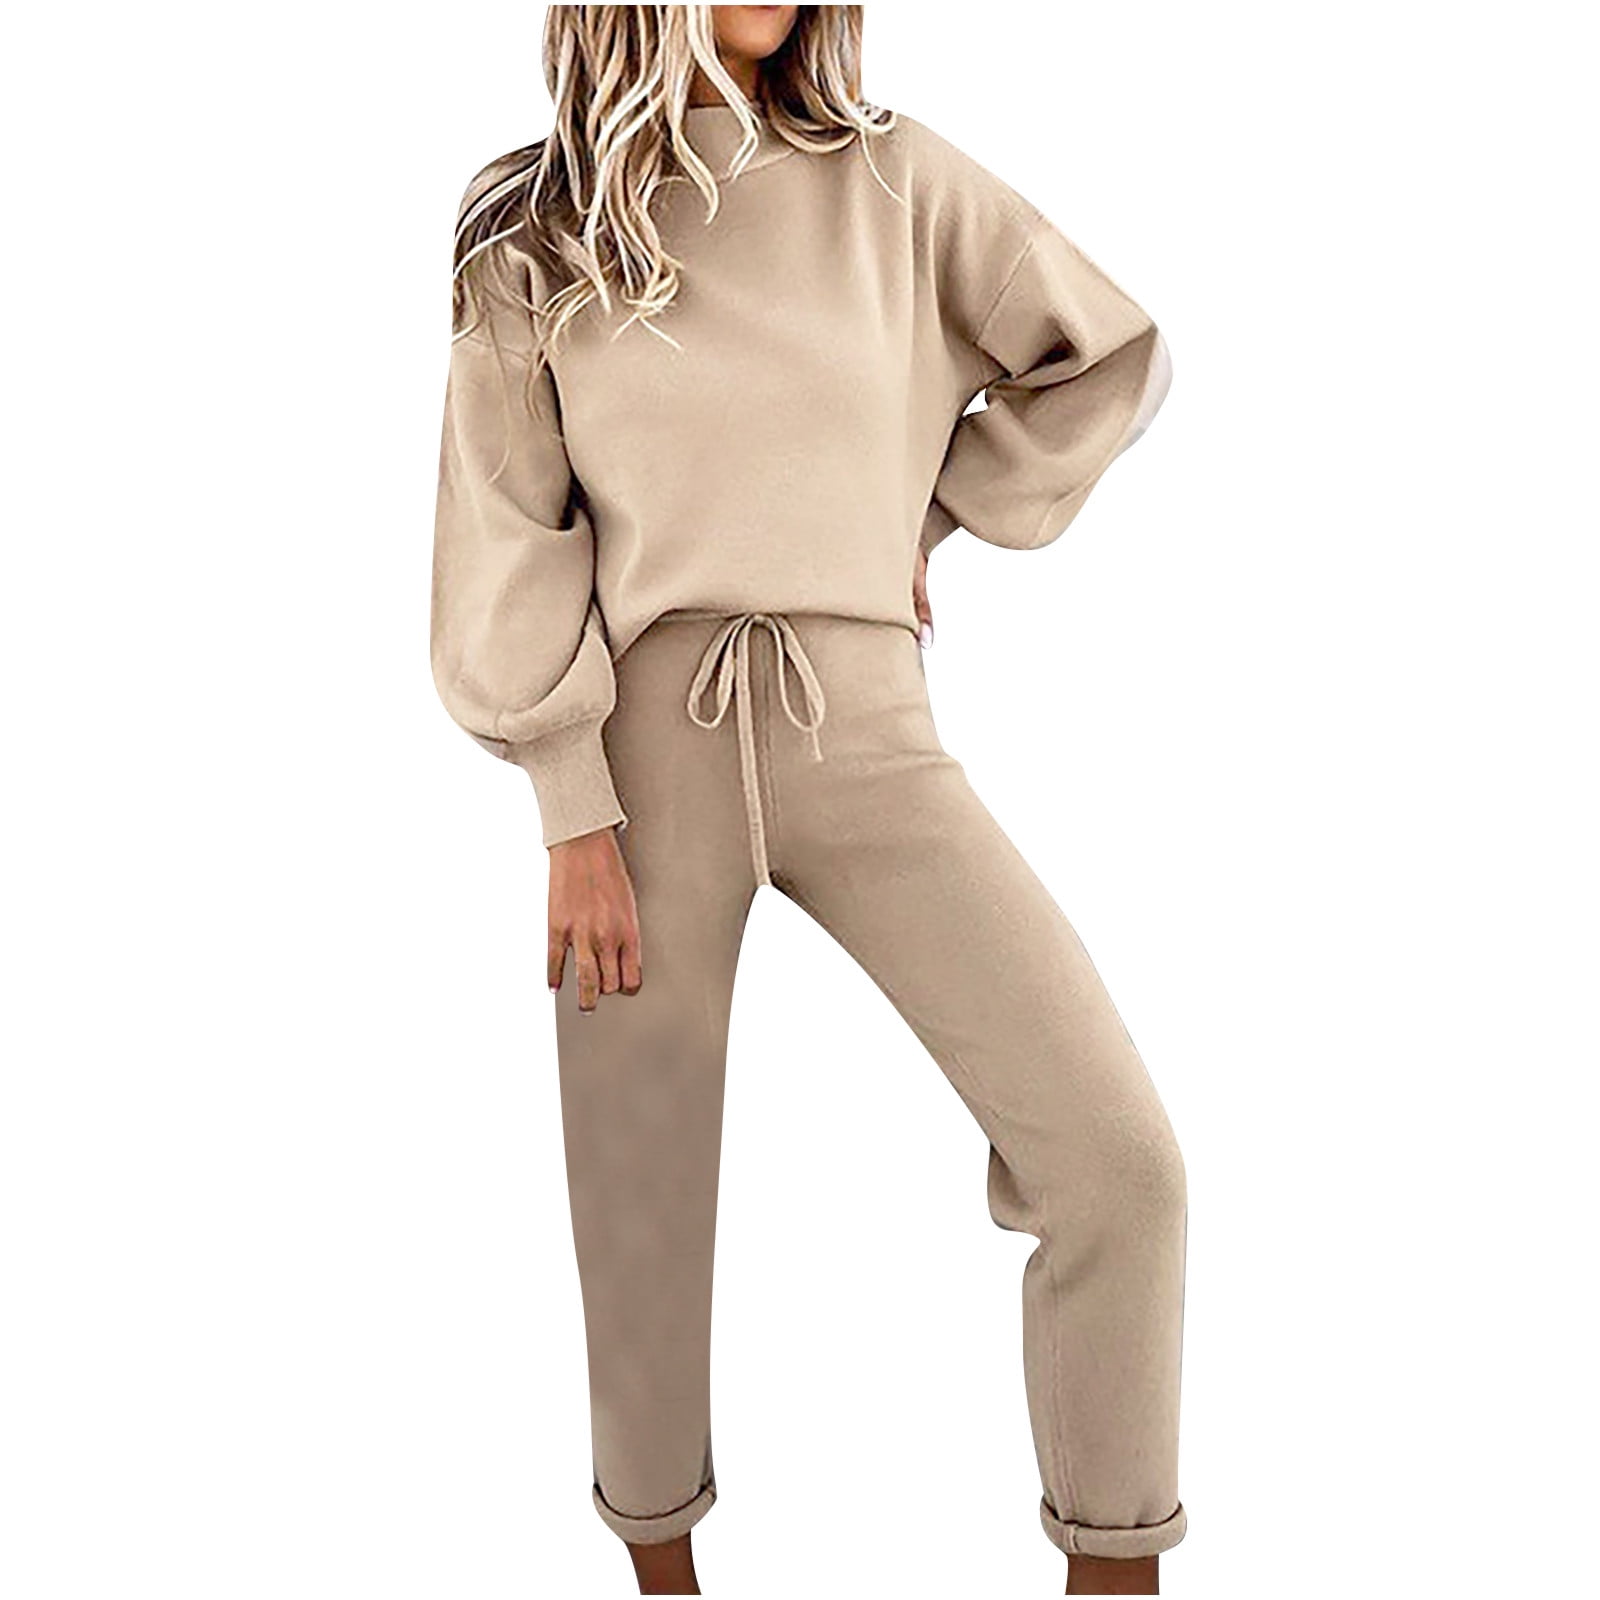 RQYYD Womens Tracksuit Sets 2 Piece Sweatsuits Hoodies Solid Color Hooded  Sweatshirts & Sweatpants Jogging Suits Outfits Lounge Sets Black XL